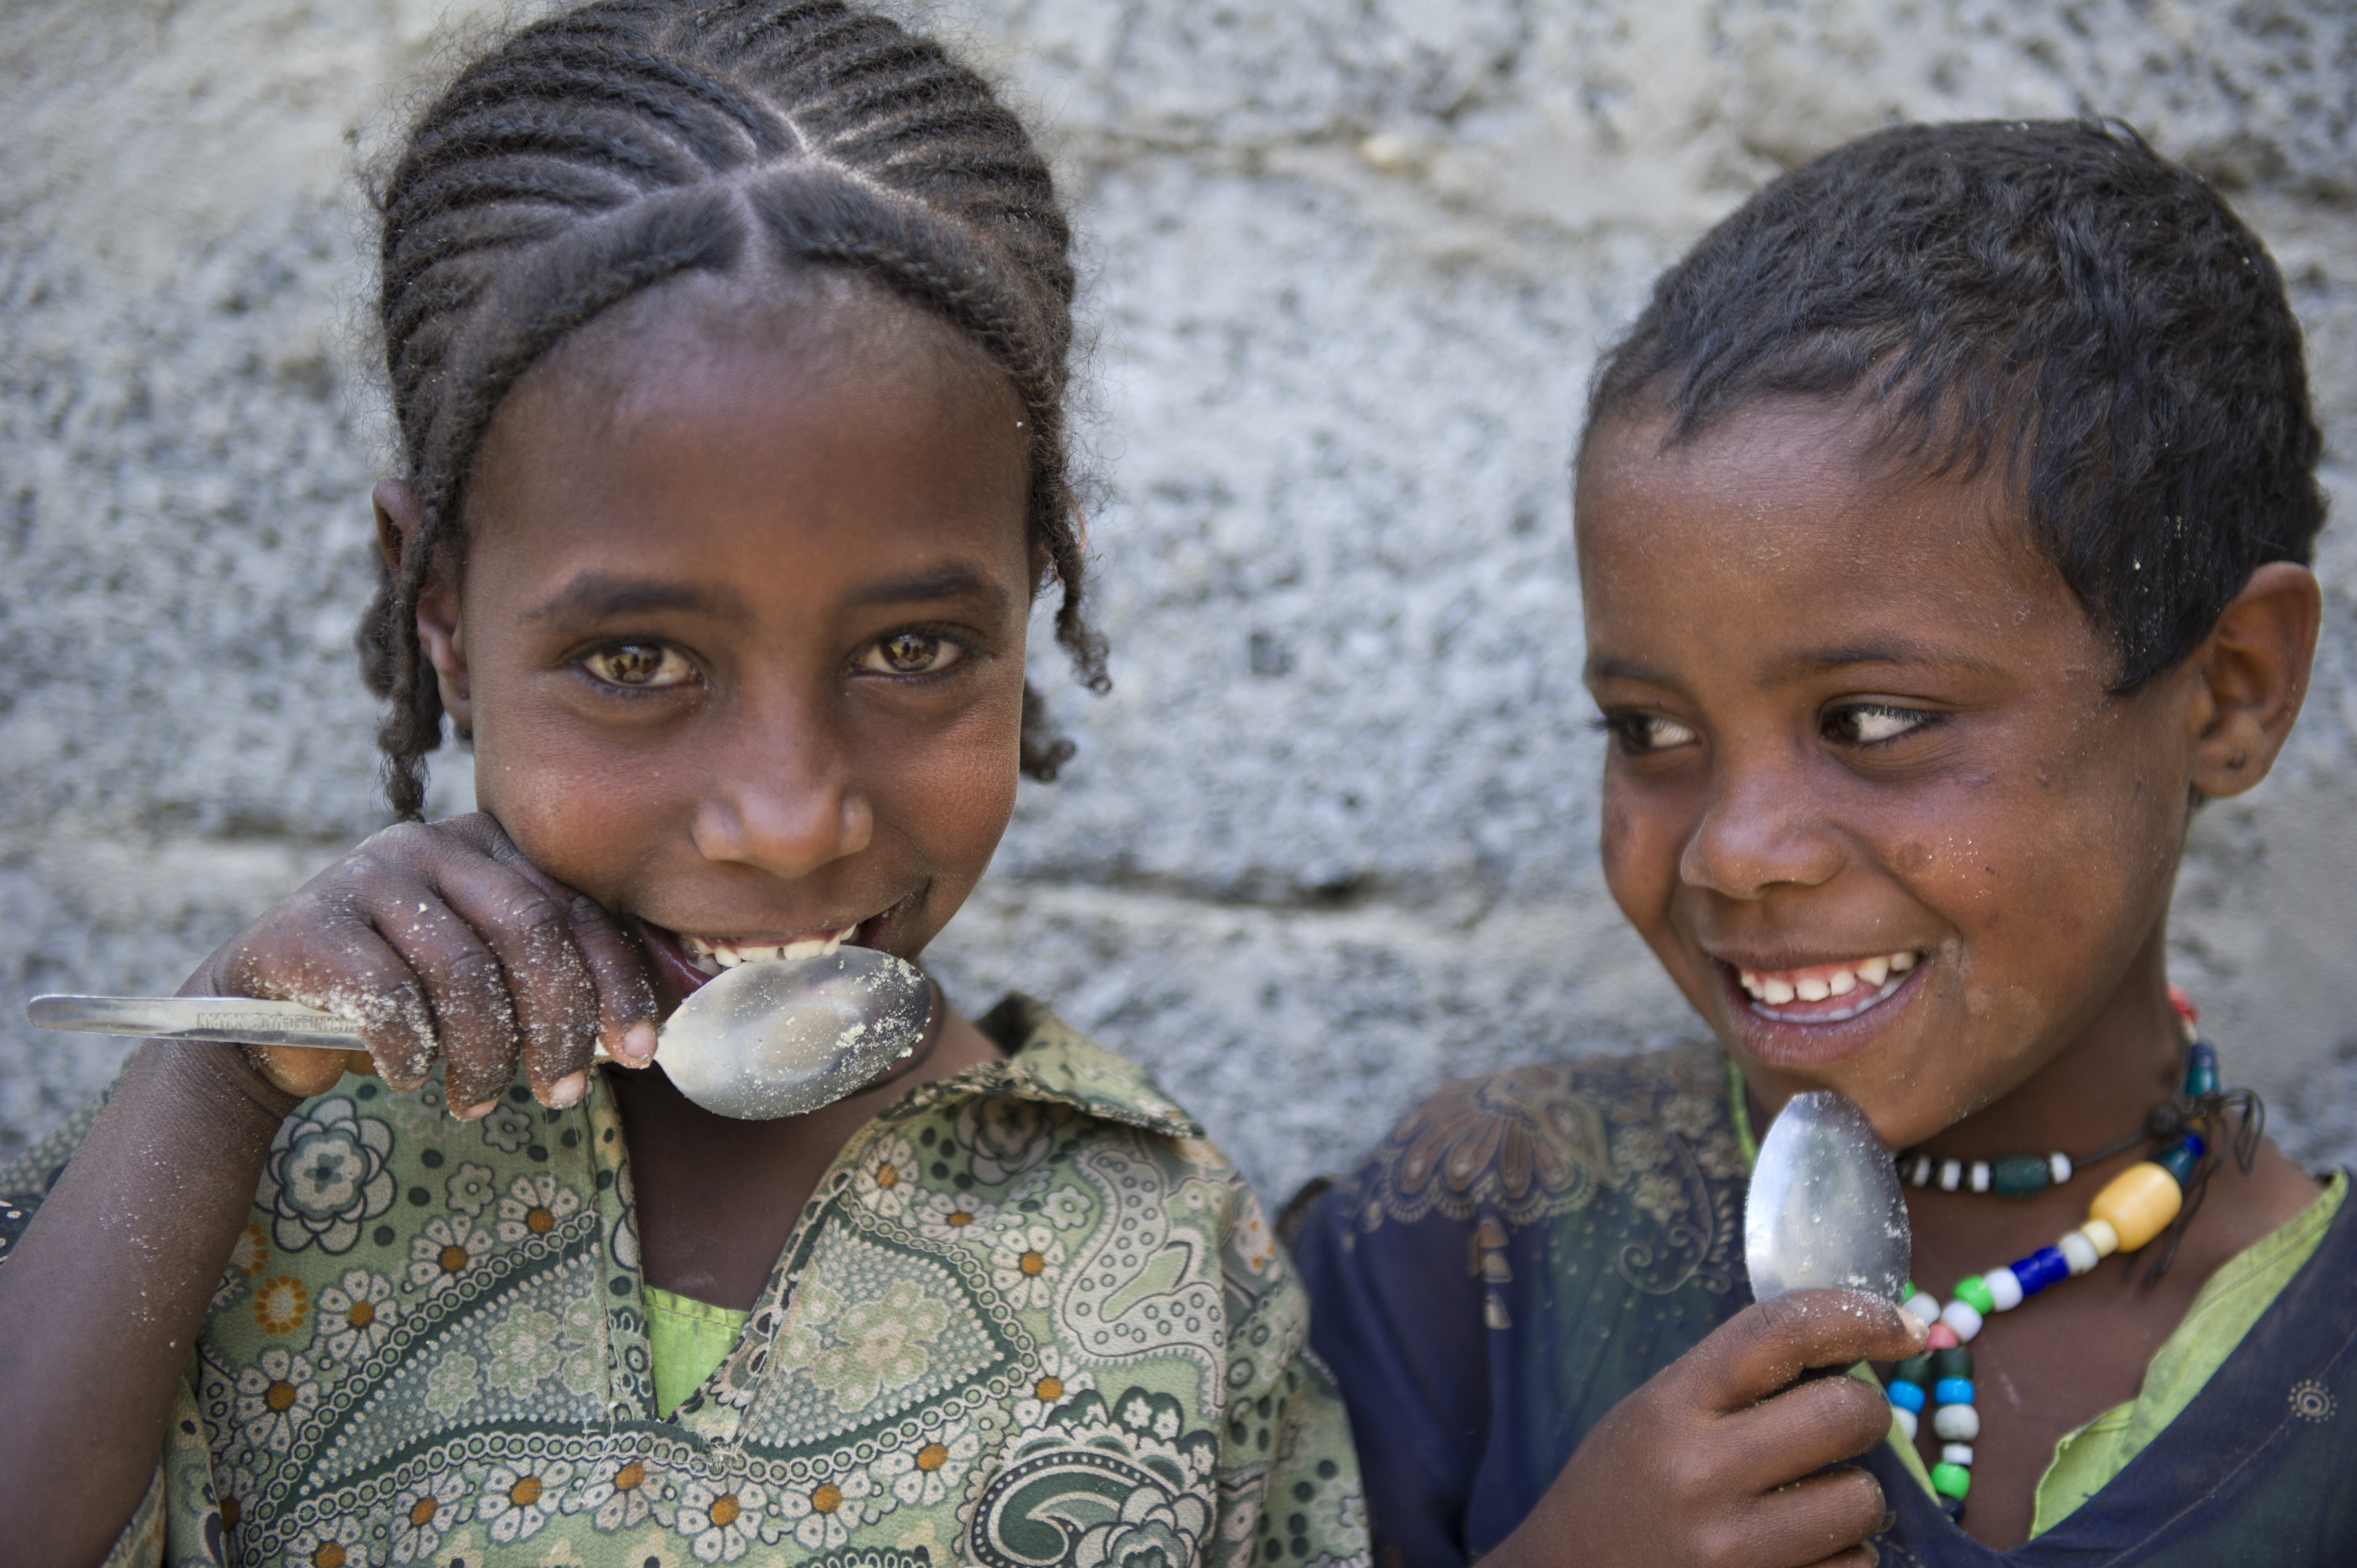 Two kids smiling and holding spoons up to their mouths